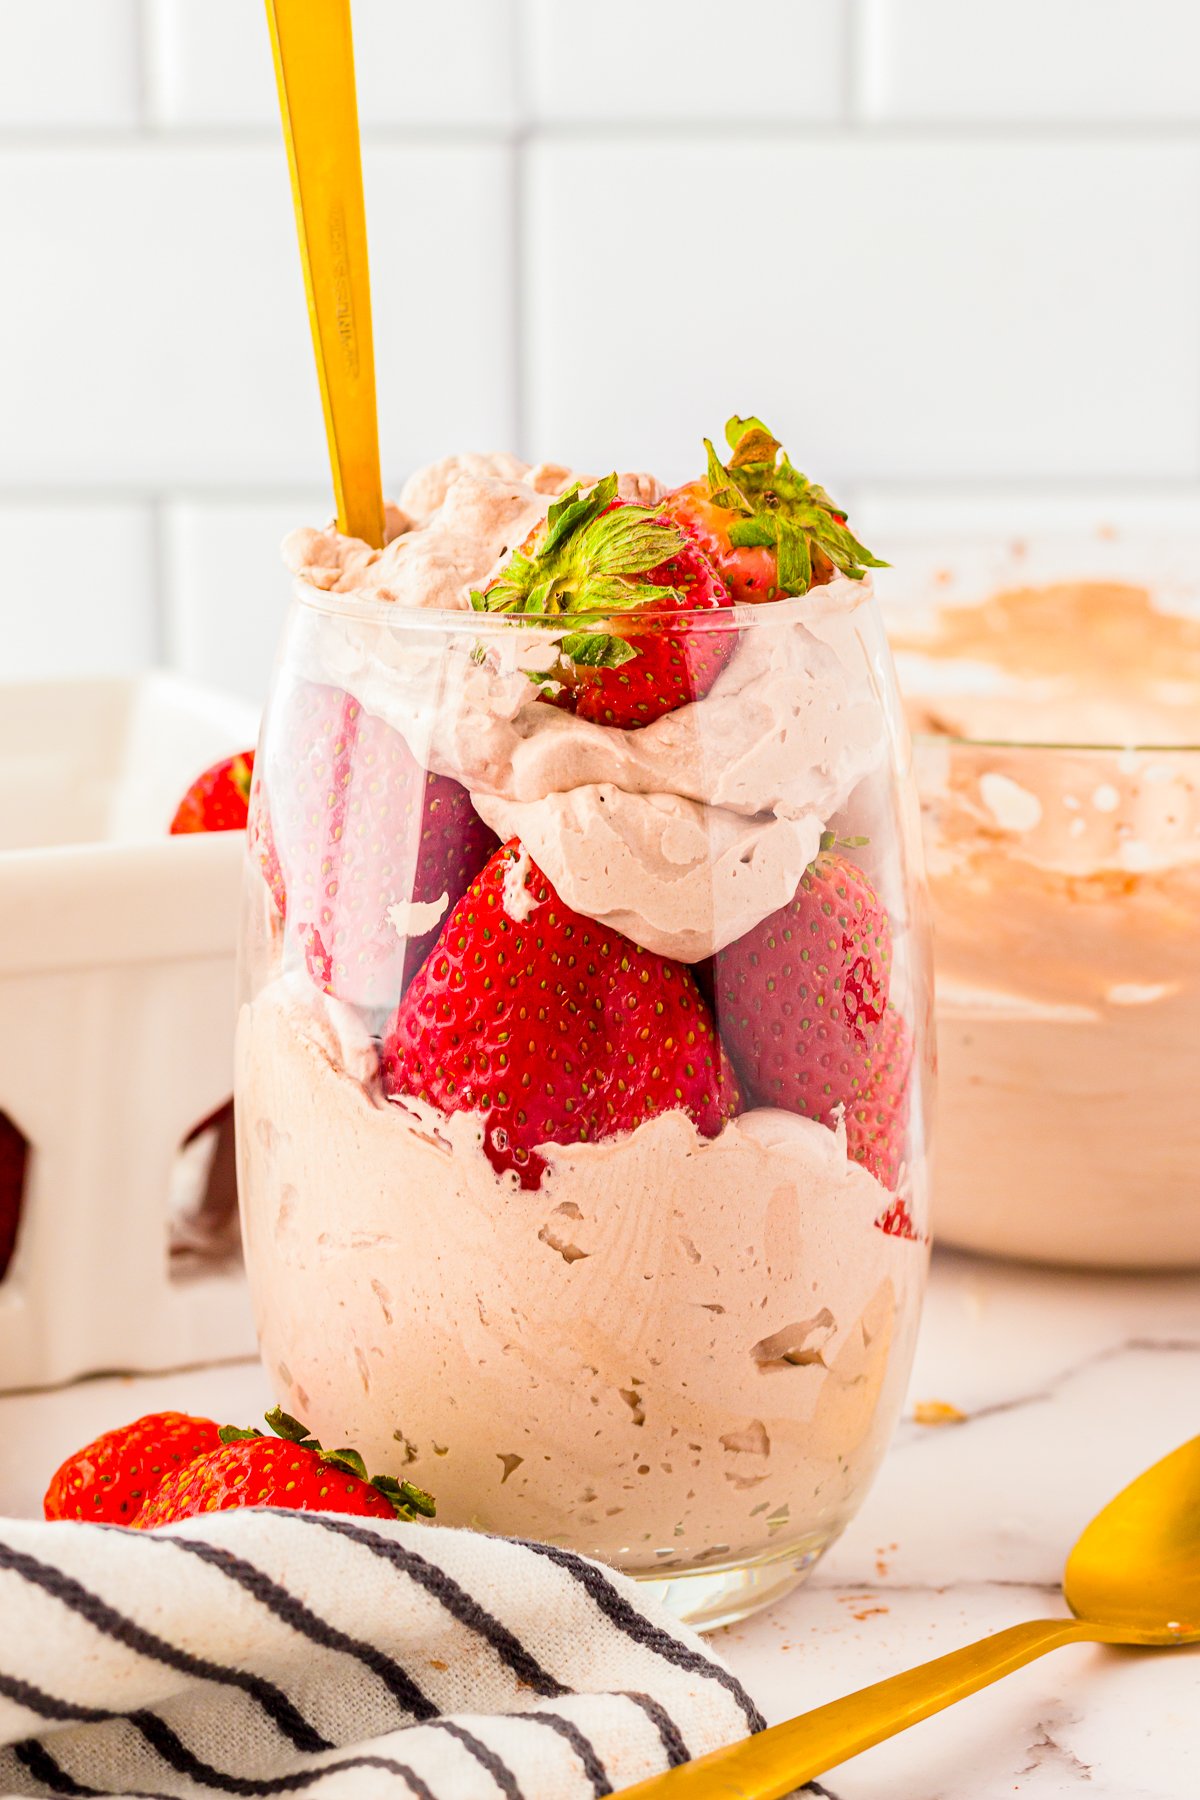 Chocolate Whipped Cream in glass with strawberries and golden spoon.